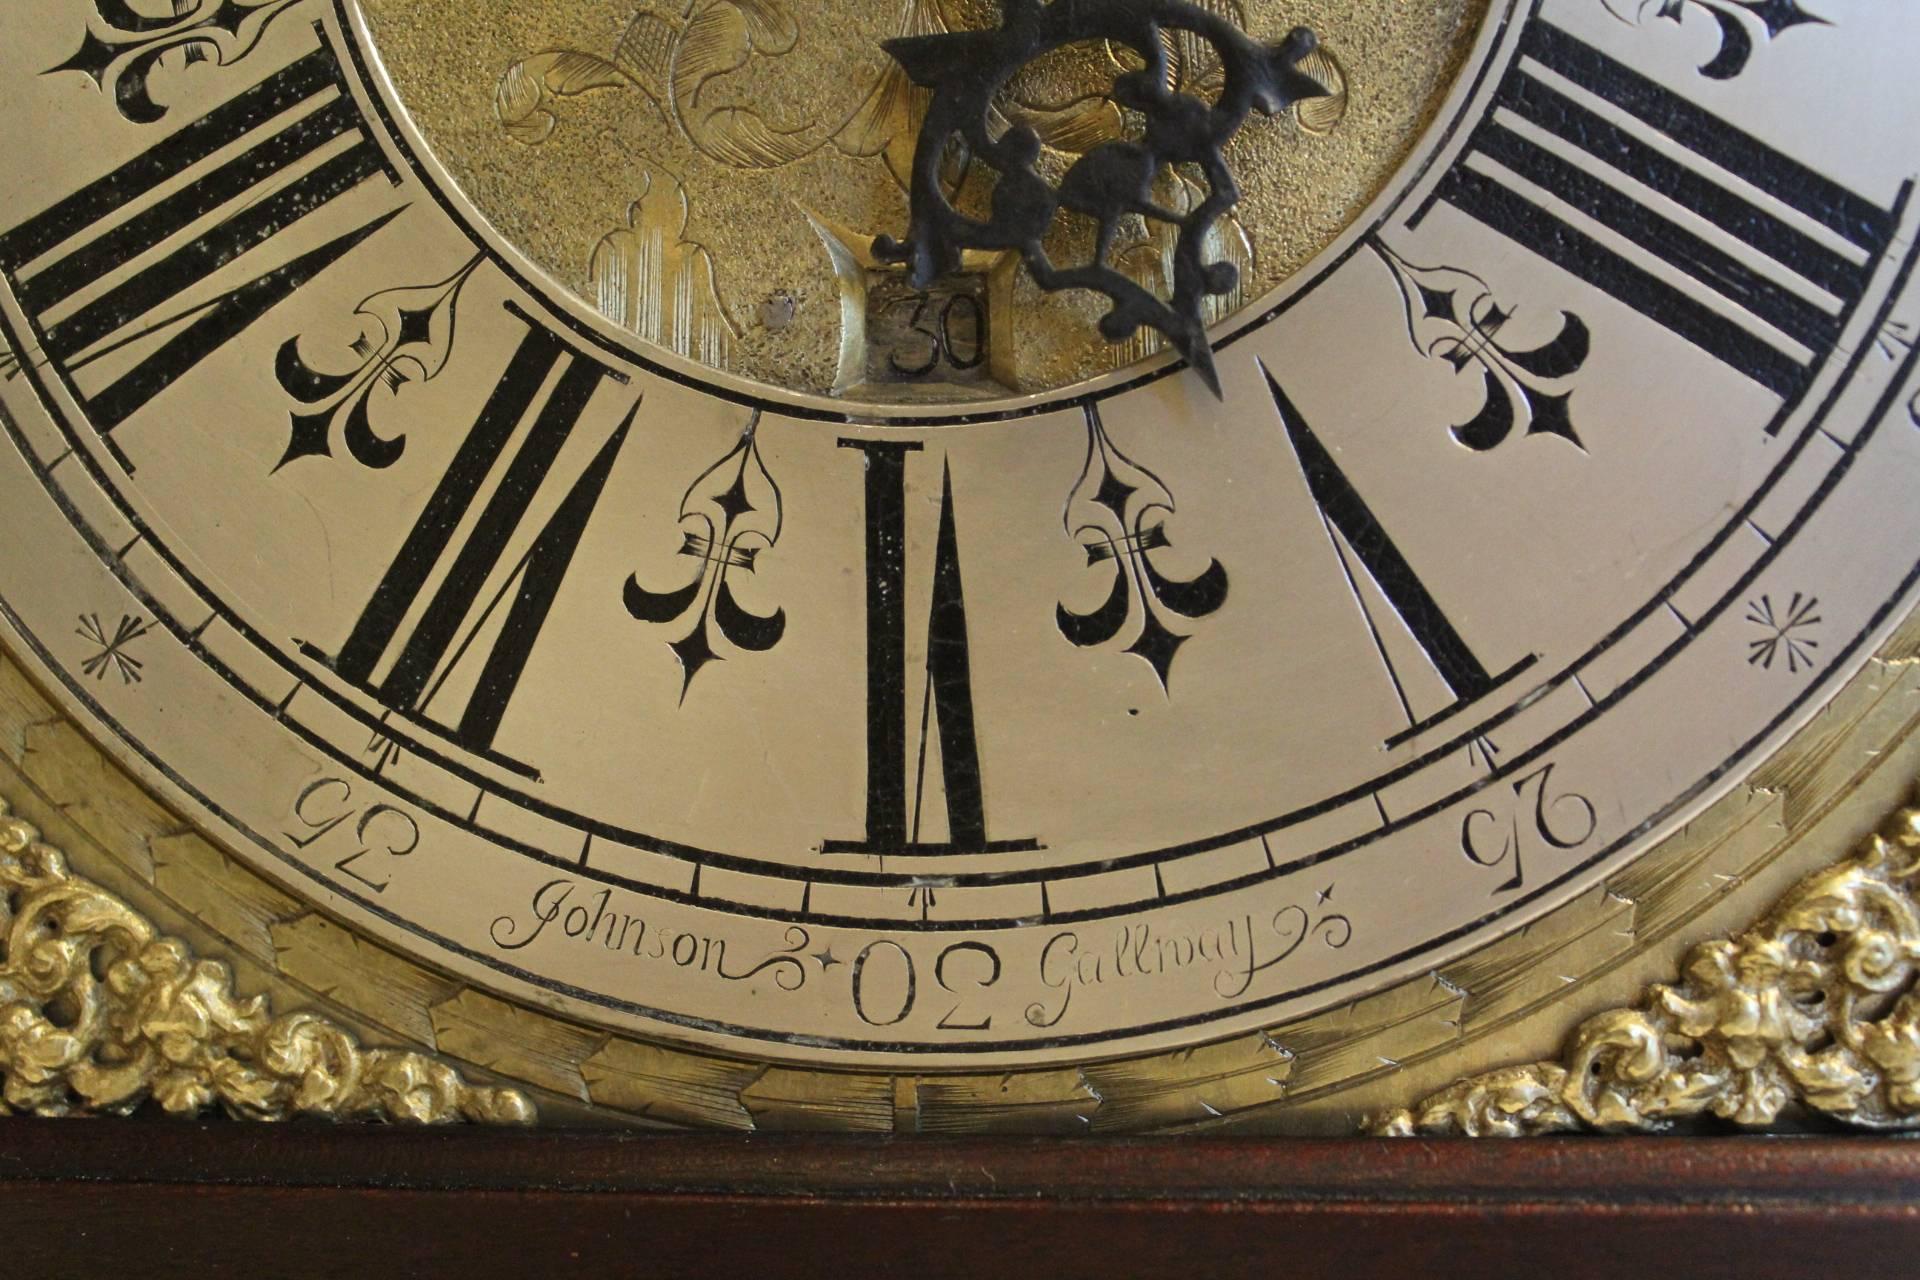 A superb rare Irish bracket clock by Johnson of Gallway, circa 1730.

It is hard to know where to start with this stunning piece of Irish history. A beautiful brass and silvered arch dial has a lunar calendar, phase of the moon and is housed in a